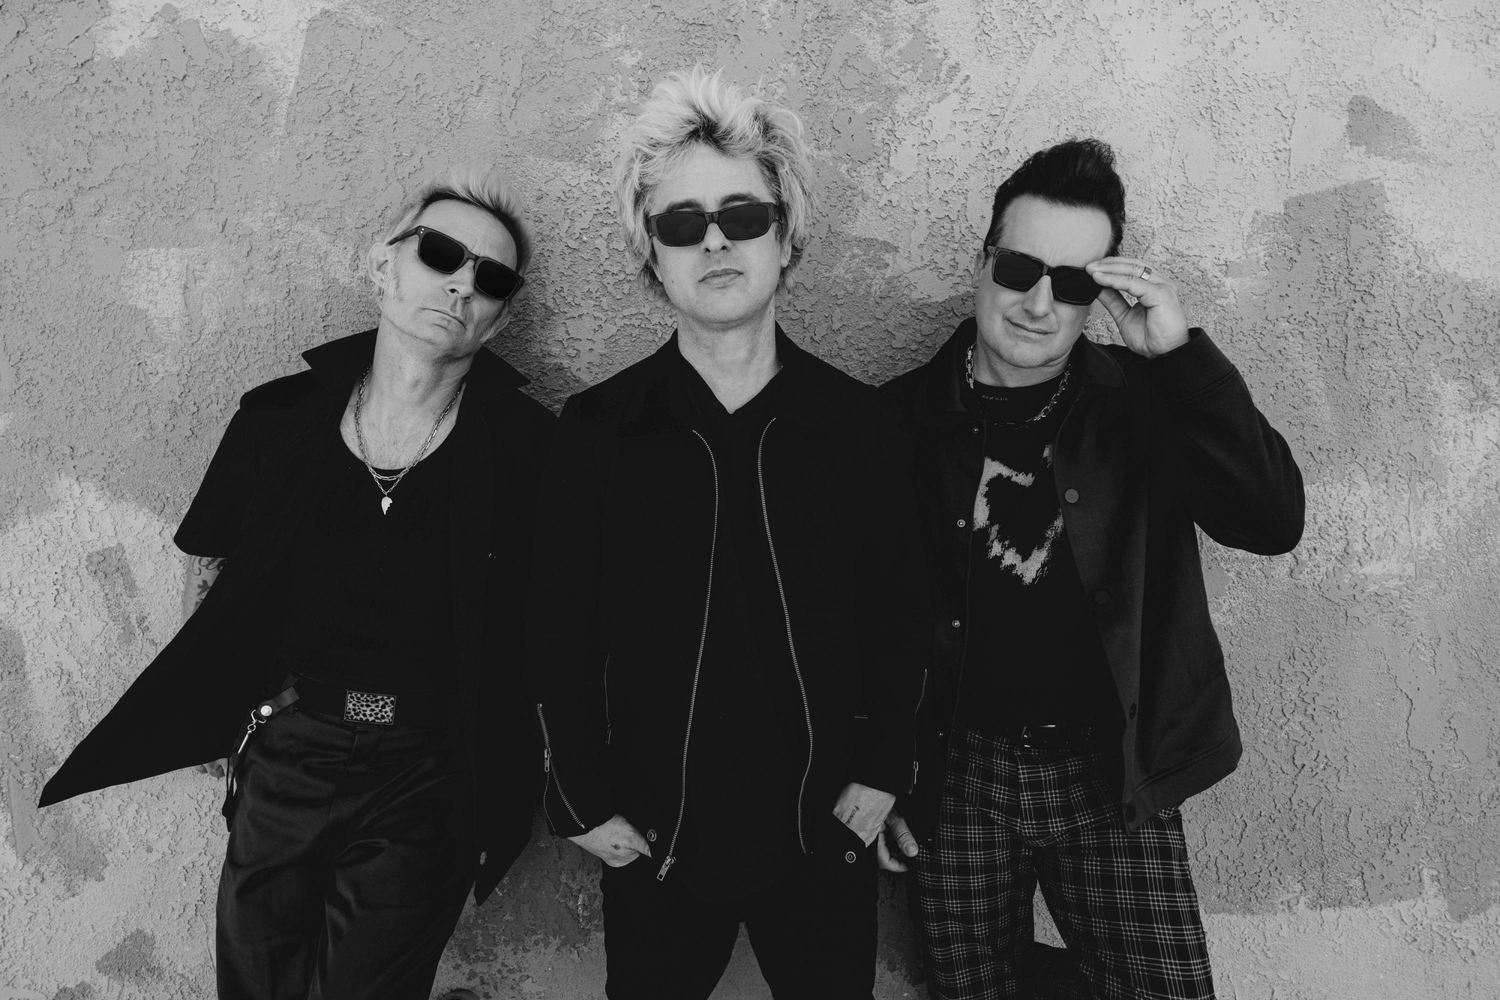 Green Day reflect on politics in punk, latest album 'Saviors' and their epic career so far